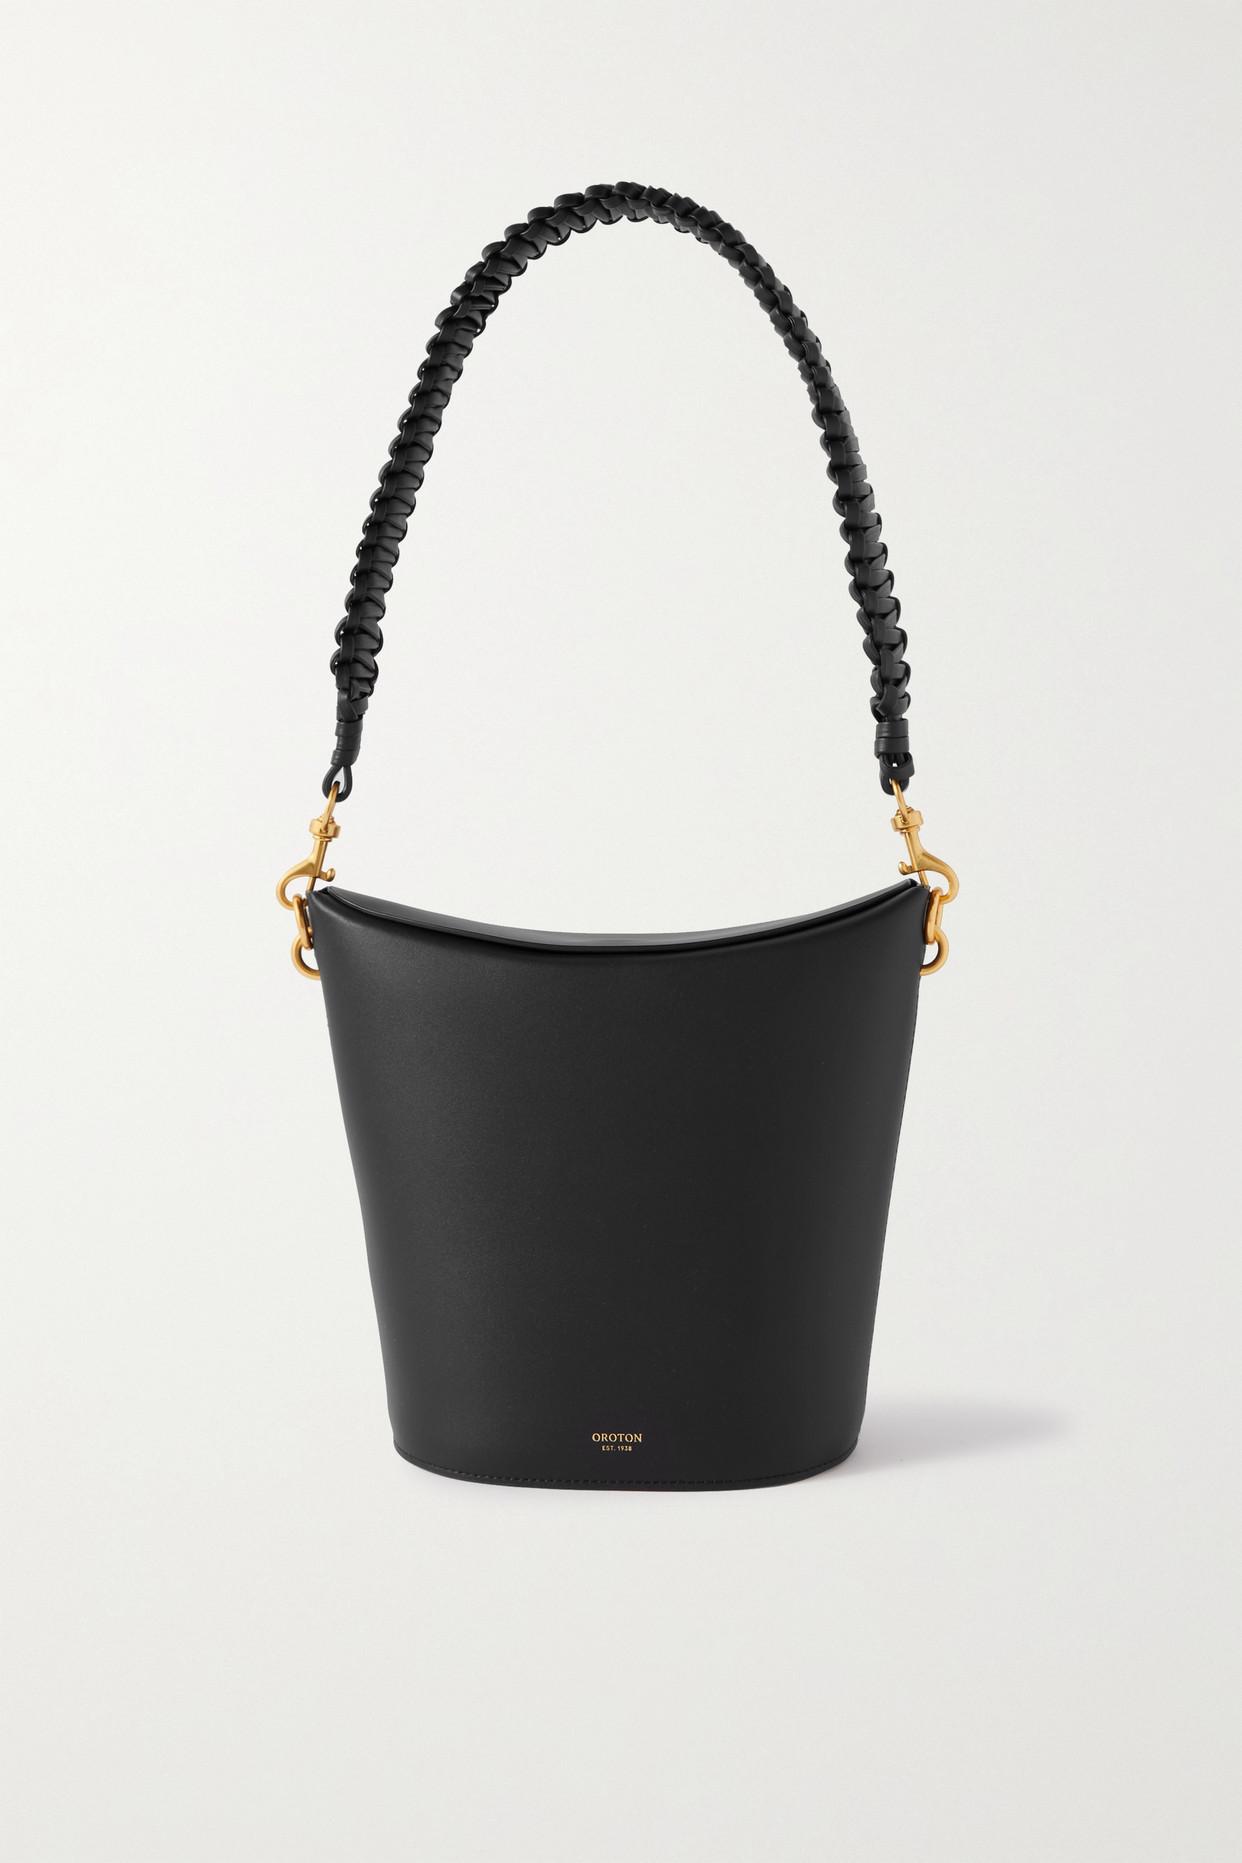 Oroton Brie Leather Bucket in | Lyst